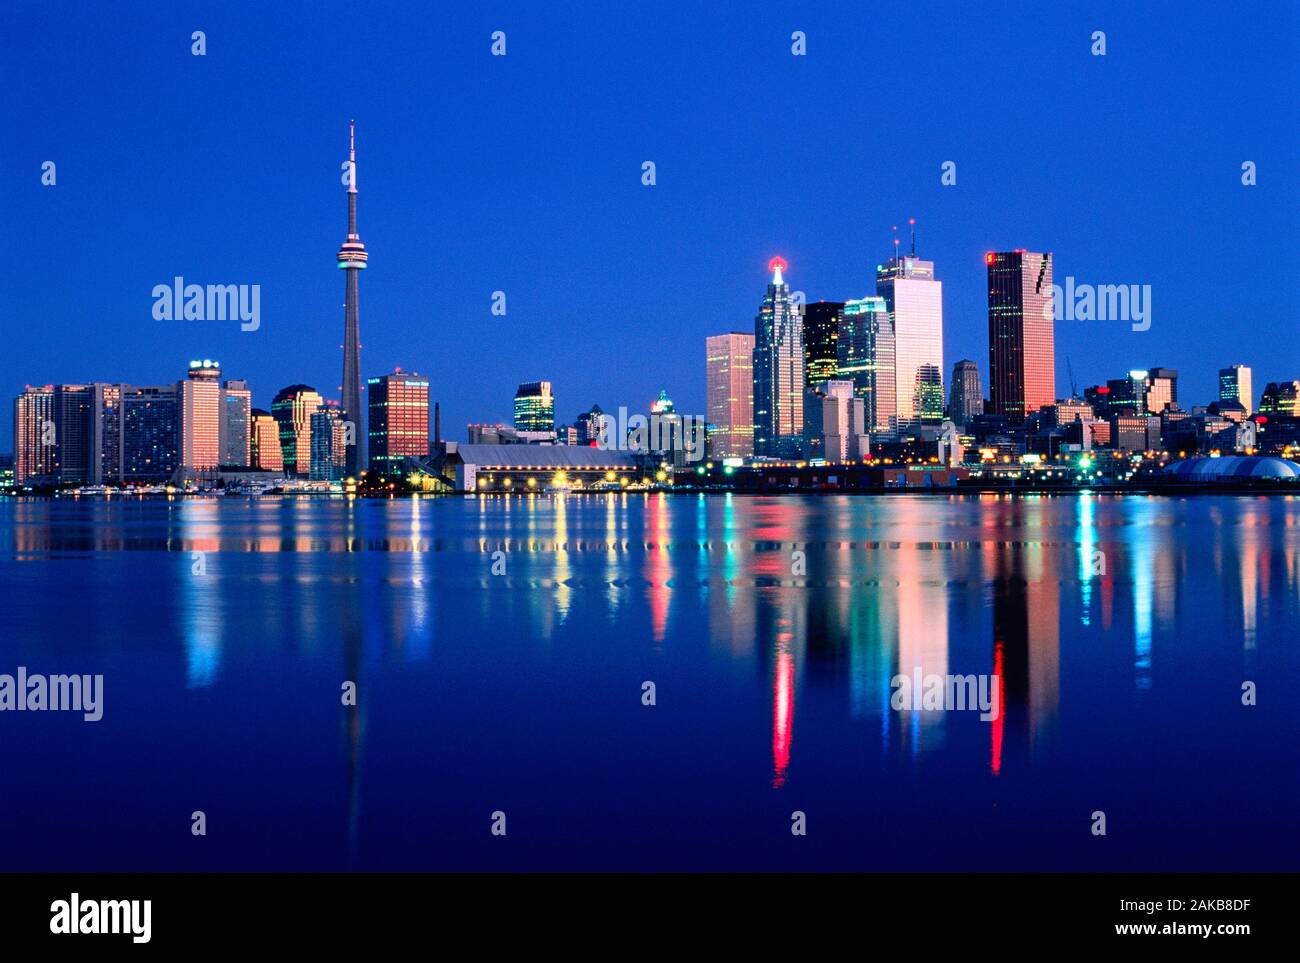 Cityscape with skyscrapers on waterfront at night, Toronto, Ontario, Canada Stock Photo